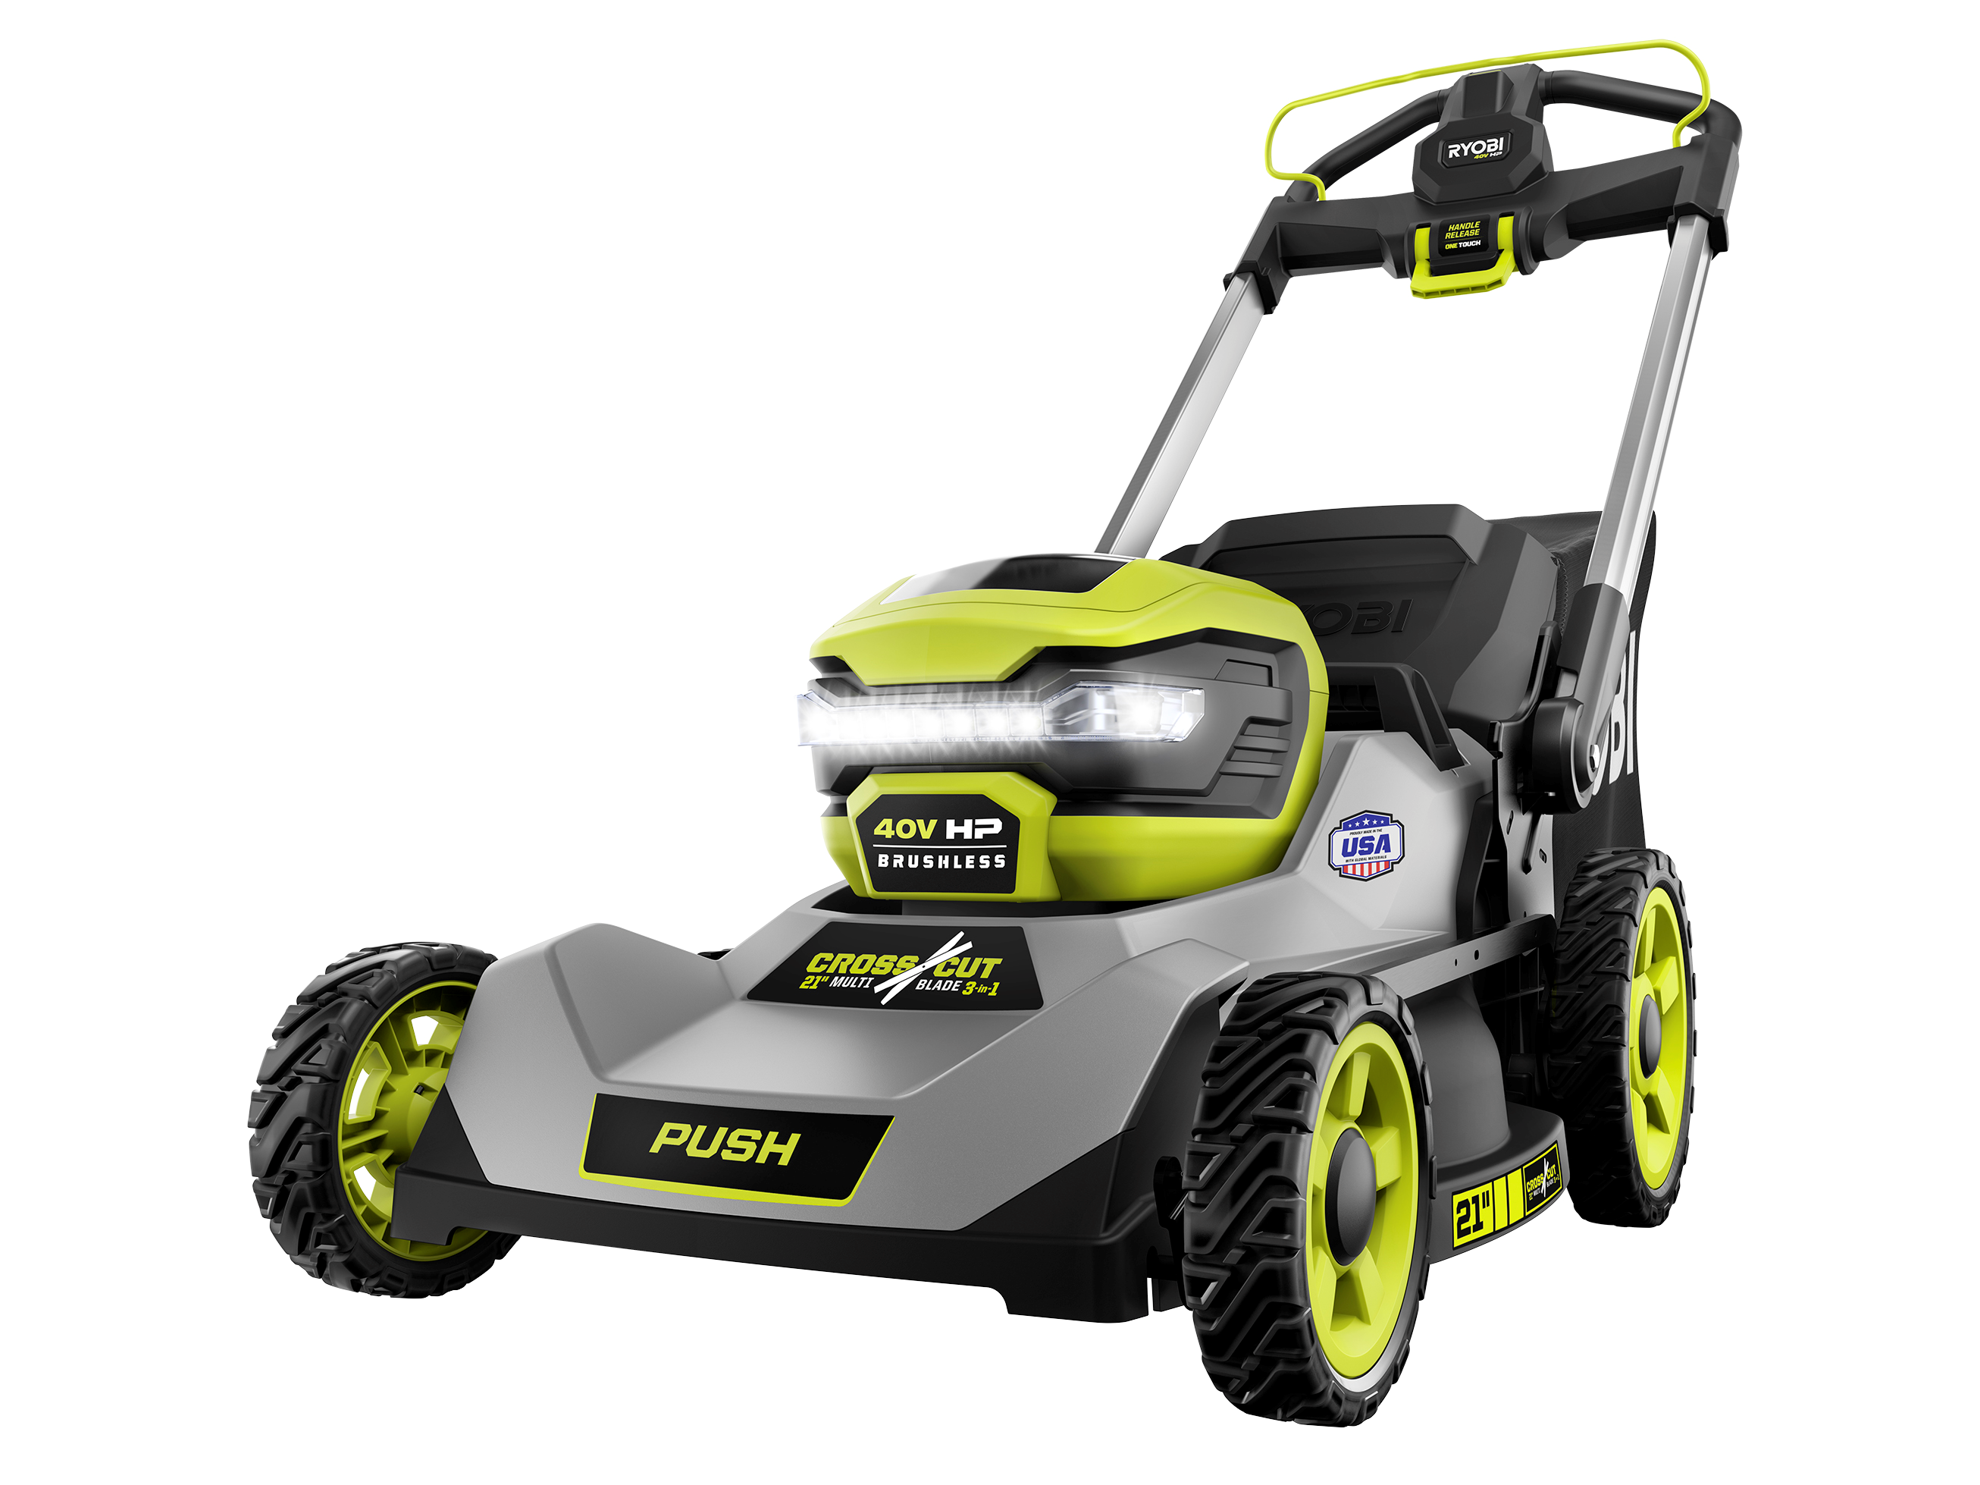 Product Features Image for 40V HP BRUSHLESS 21" CROSSCUT PUSH LAWN MOWER KIT.